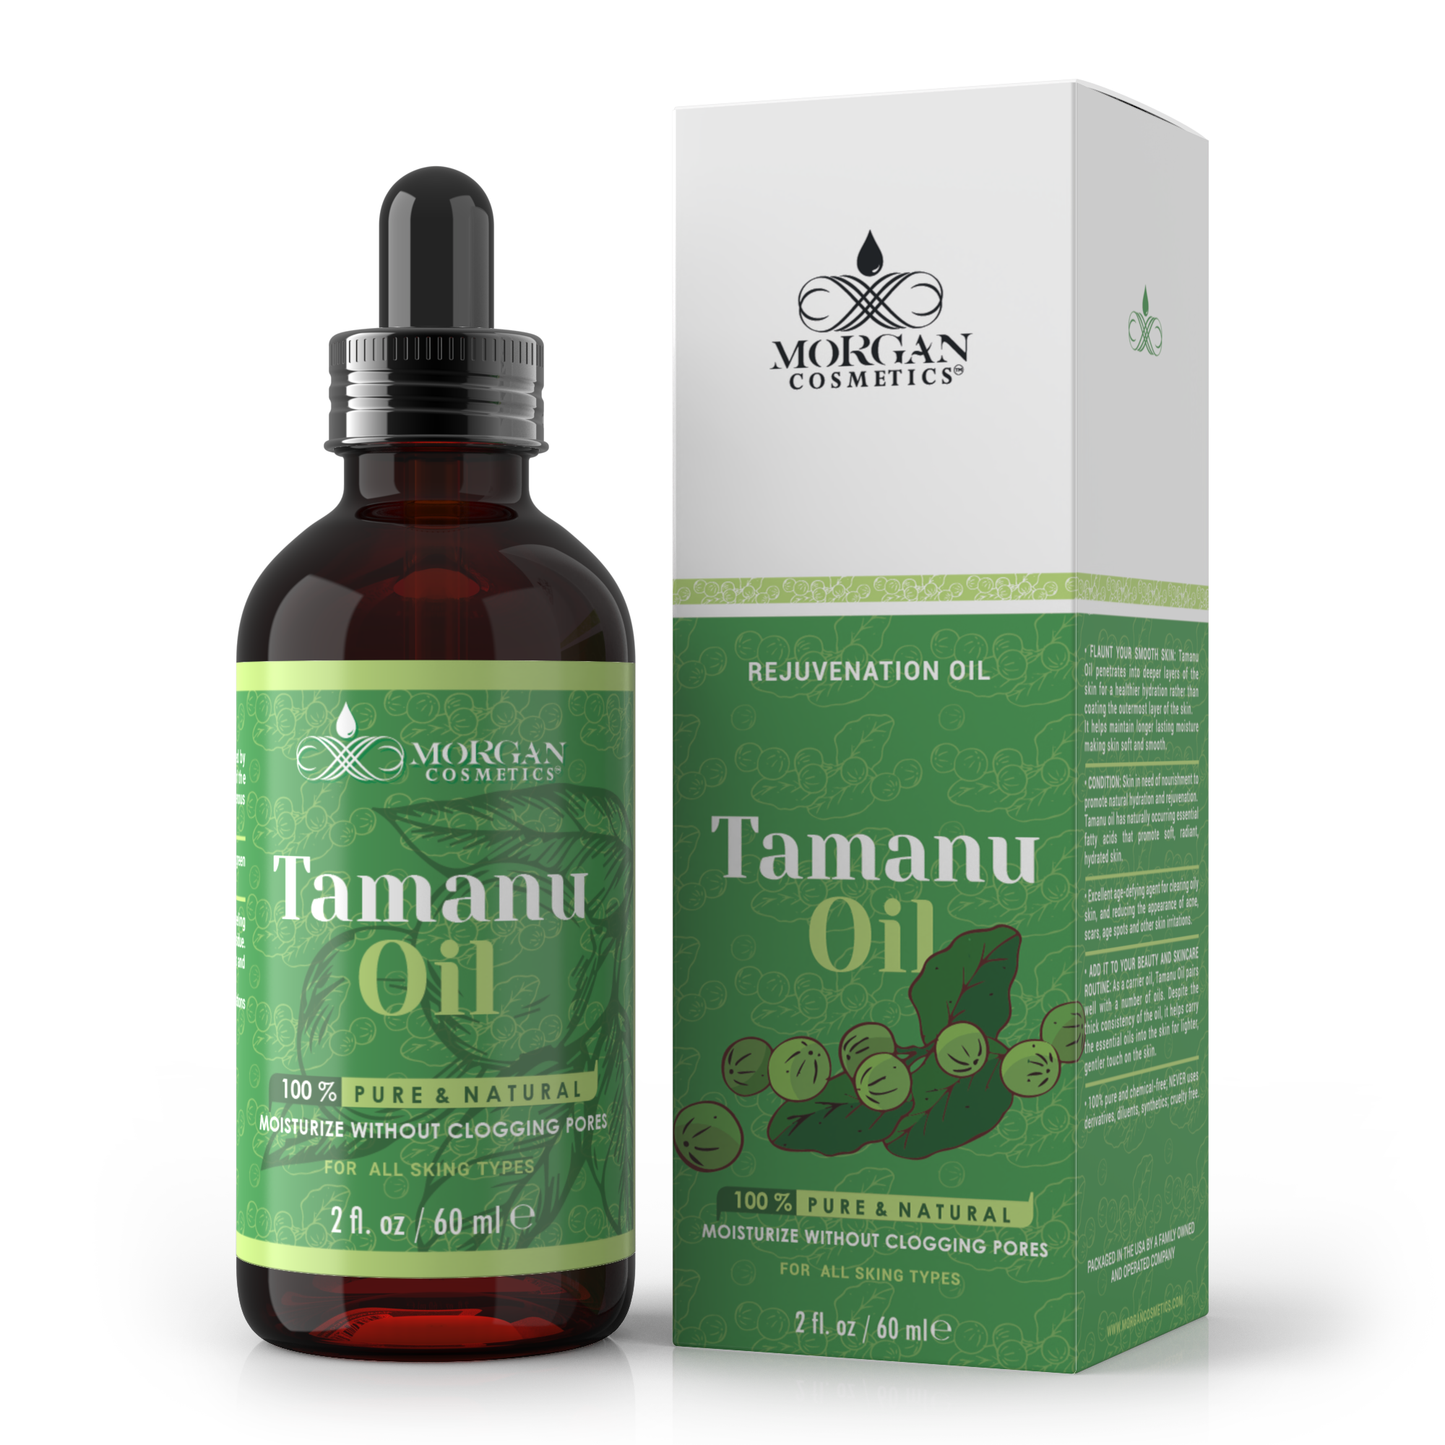 100% Tamanu Oil Cold Pressed Unrefined - Tamanu Oil for Skin - Natural Cold Pressed Oil Makes Skin Smooth, Plump and Soft for Lighter and Gentler Touch (2 FL. Oz)